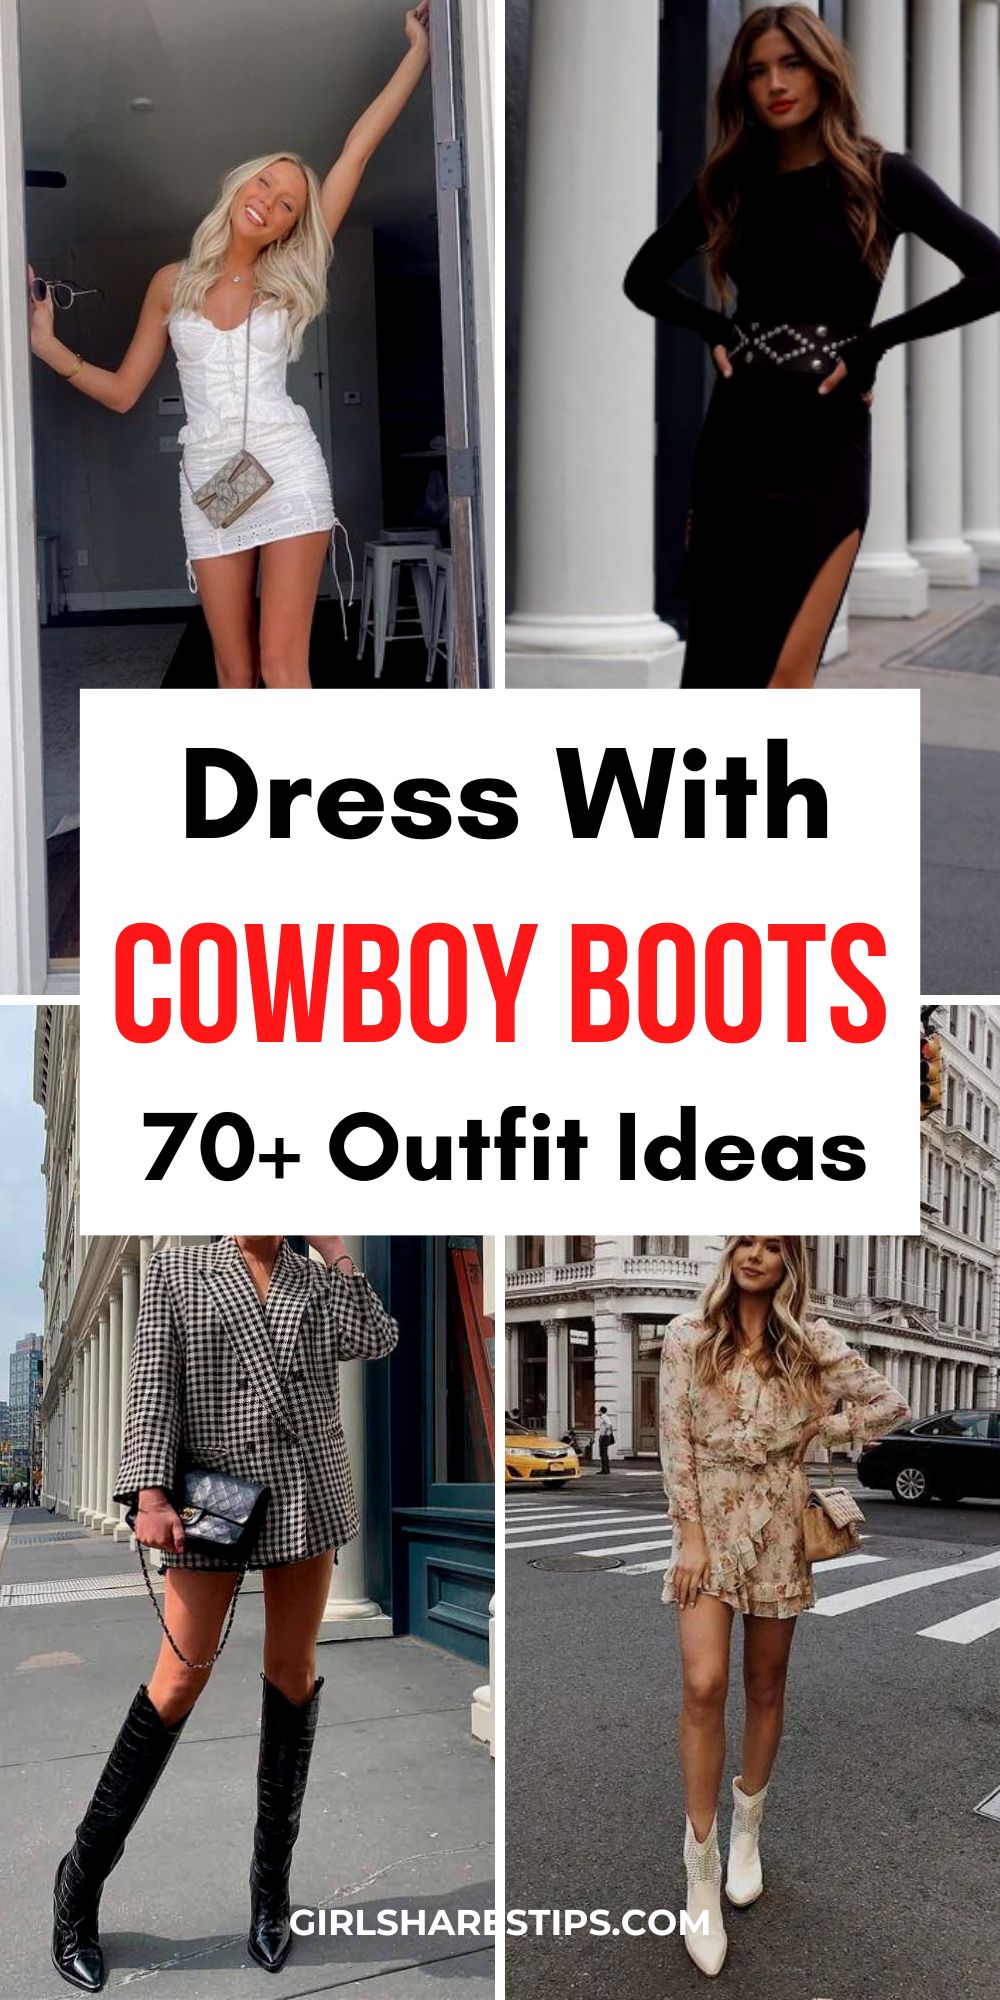 dresses to wear with cowboy boots outfit ideas collage